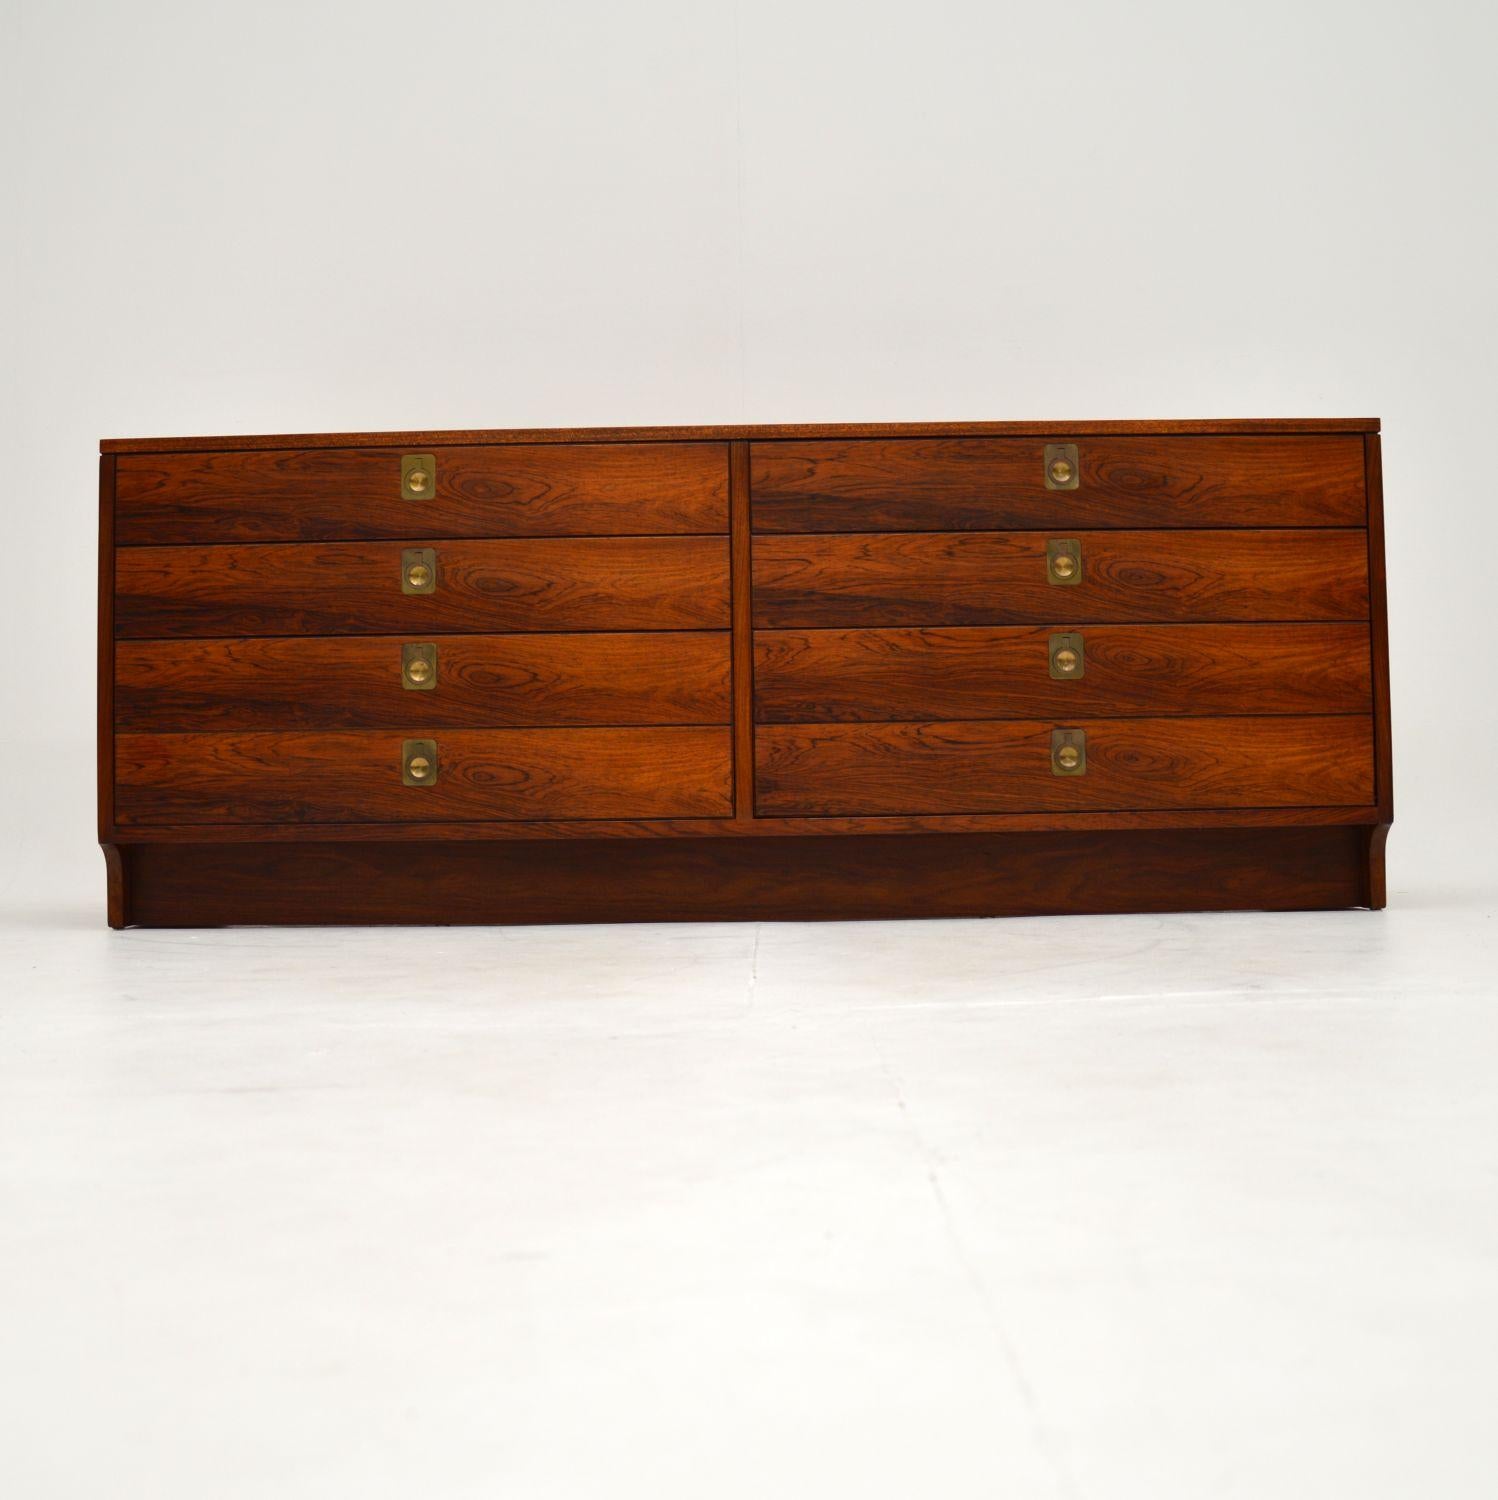 A stunning low bank of drawers in wood, designed by Robert Heritage. This was made in England by Archie Shine, it dates from the 1960’s.

The quality is absolutely outstanding, and this is a very useful item. It is low and long, with four slim